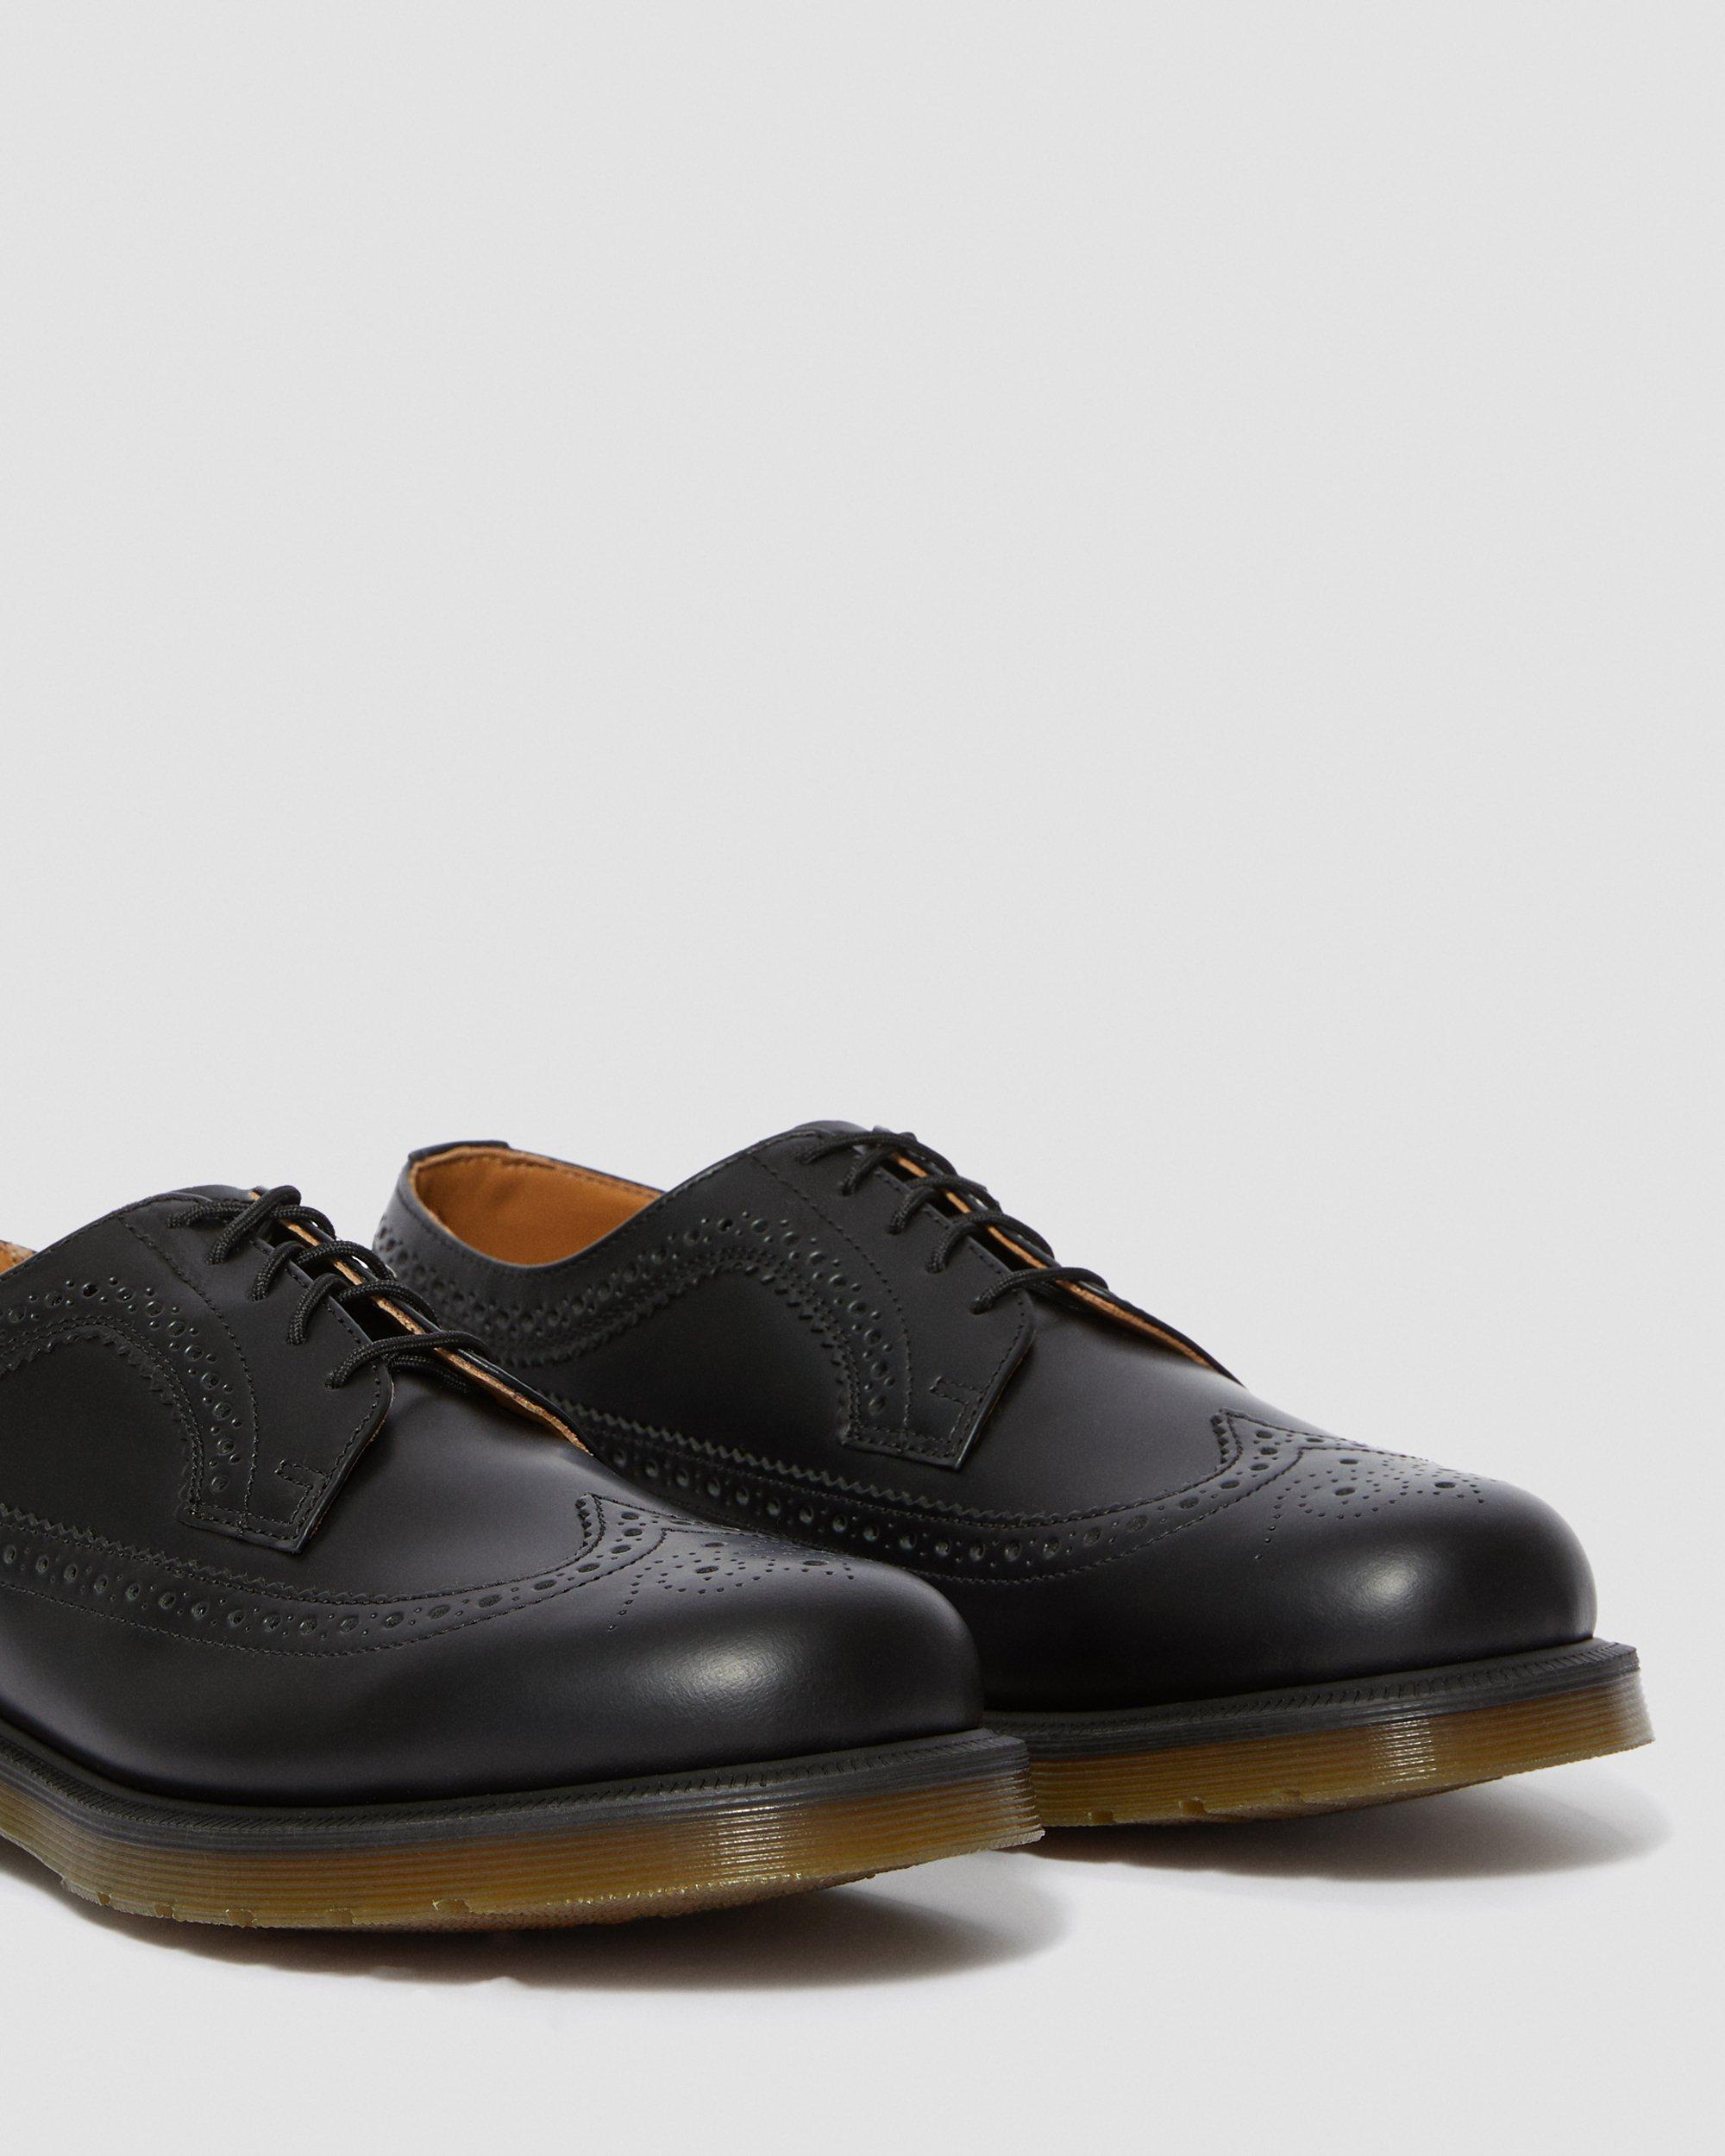 DR MARTENS 3989 Smooth Leather Brogue Shoes